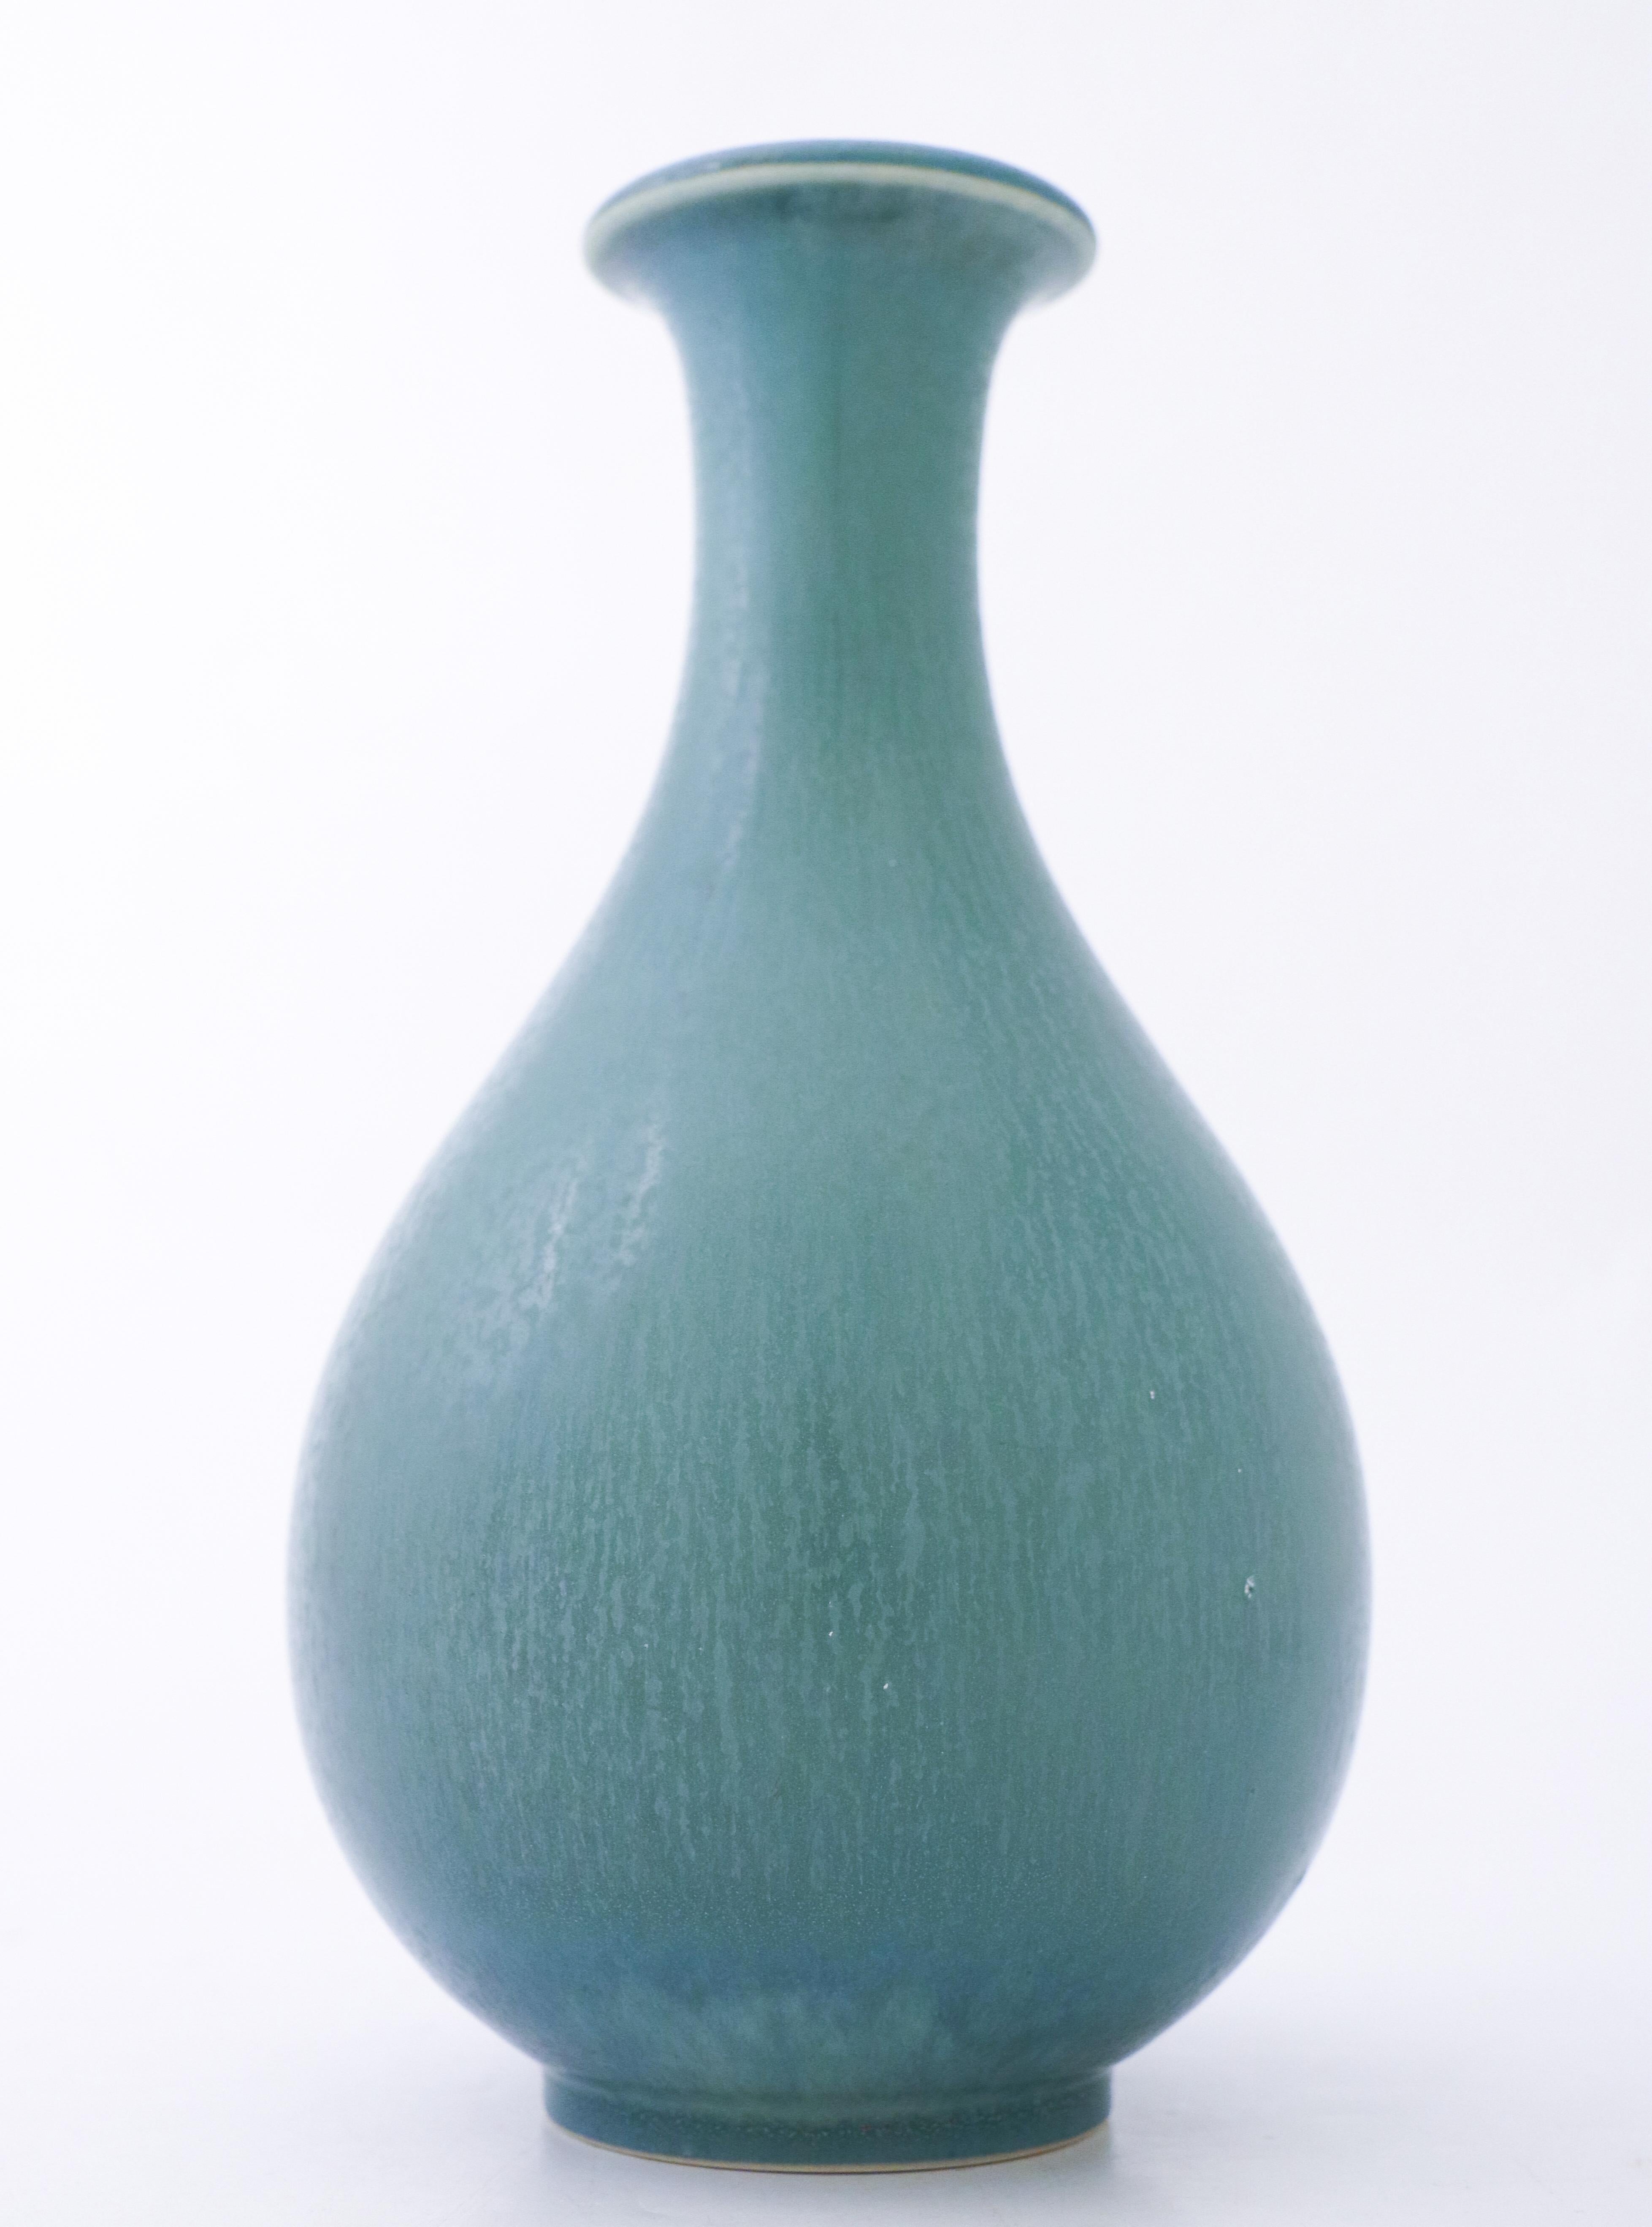 A turquoise vase with a lovely har fur glaze designed by Gunnar Nylund at Rörstrand, it´s 24.5 cm (9.8) high. It´s in excellent condition except from some minor marks in the glaze and marked as 1st quality. 

Gunnar Nylund was born in Paris 1904